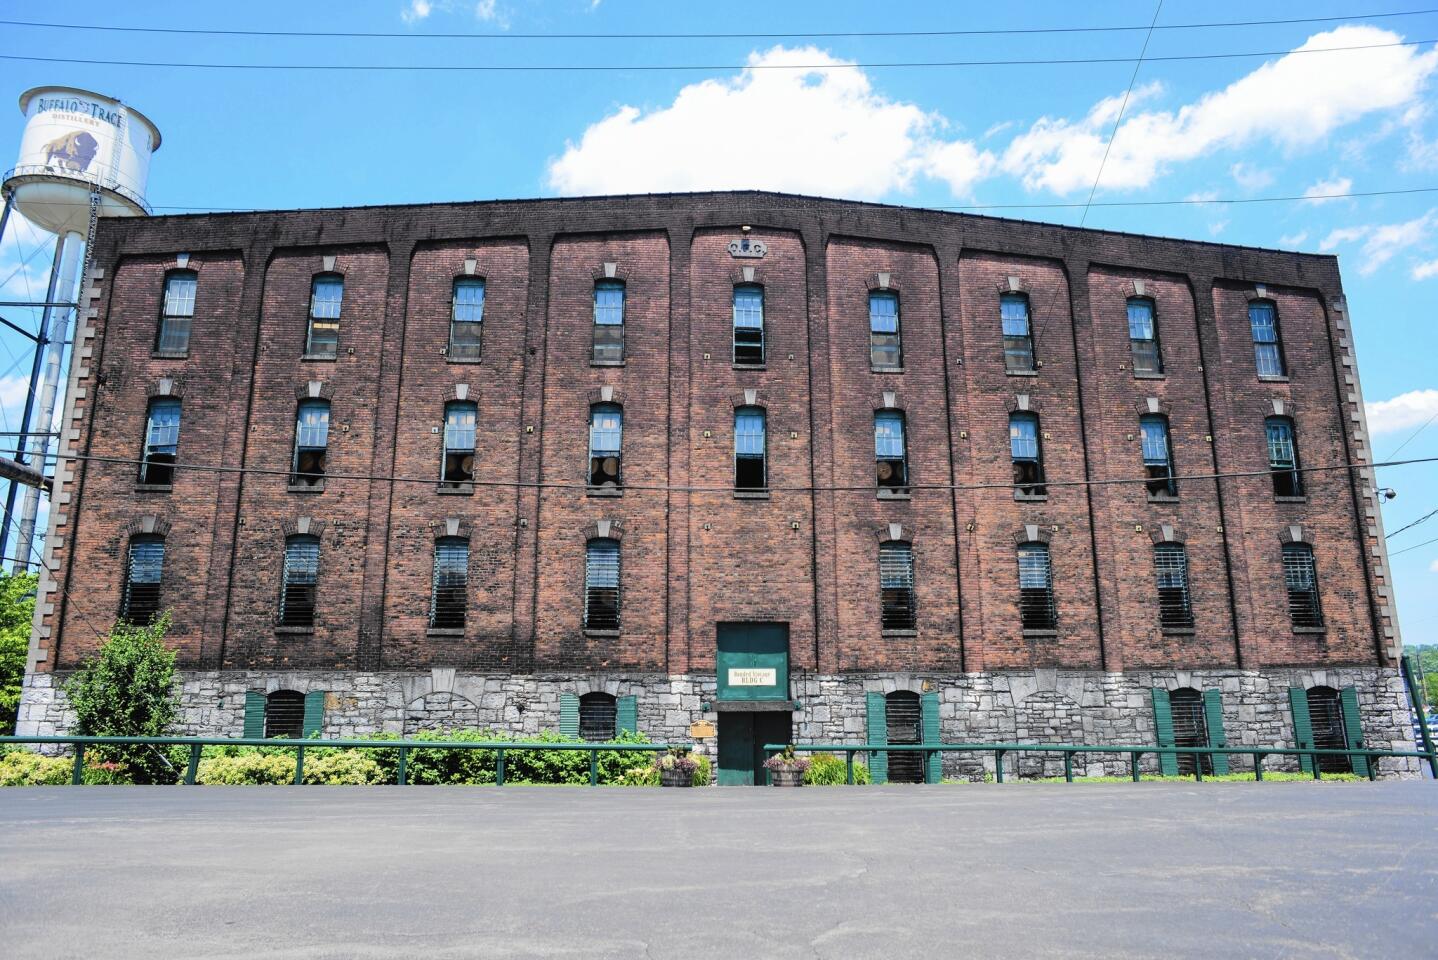 Nearly 24,000 barrels of whiskey age inside Warehouse C, a 130-year-old building at Buffalo Trace Distillery in Frankfort, Ky.